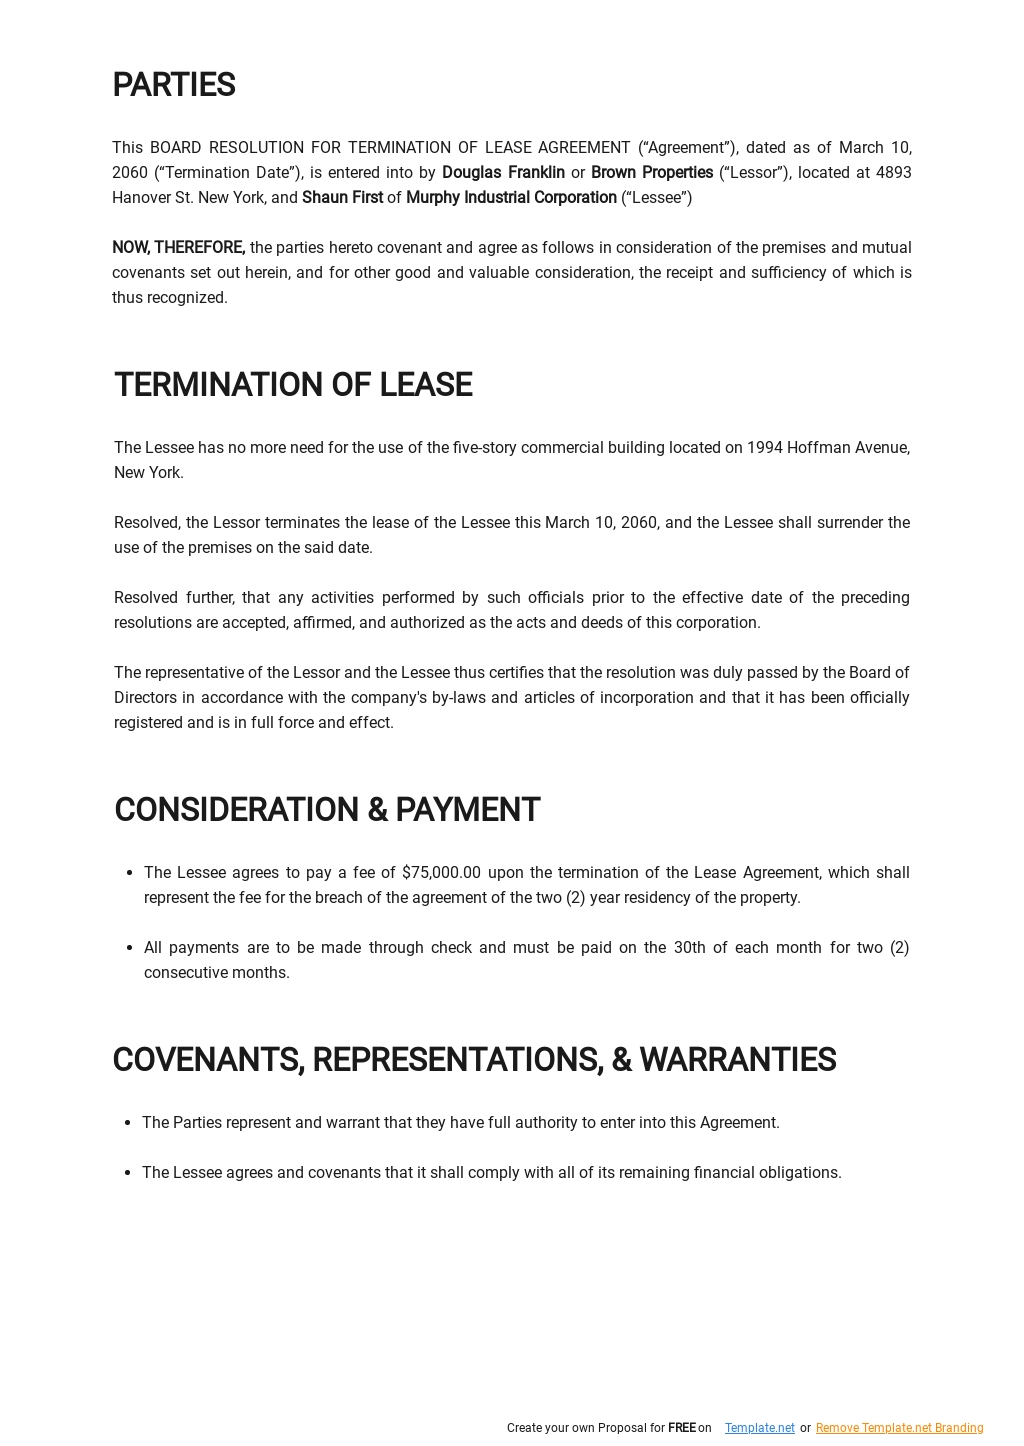 Board Resolution for Termination of Lease Agreement Template  1.jpe